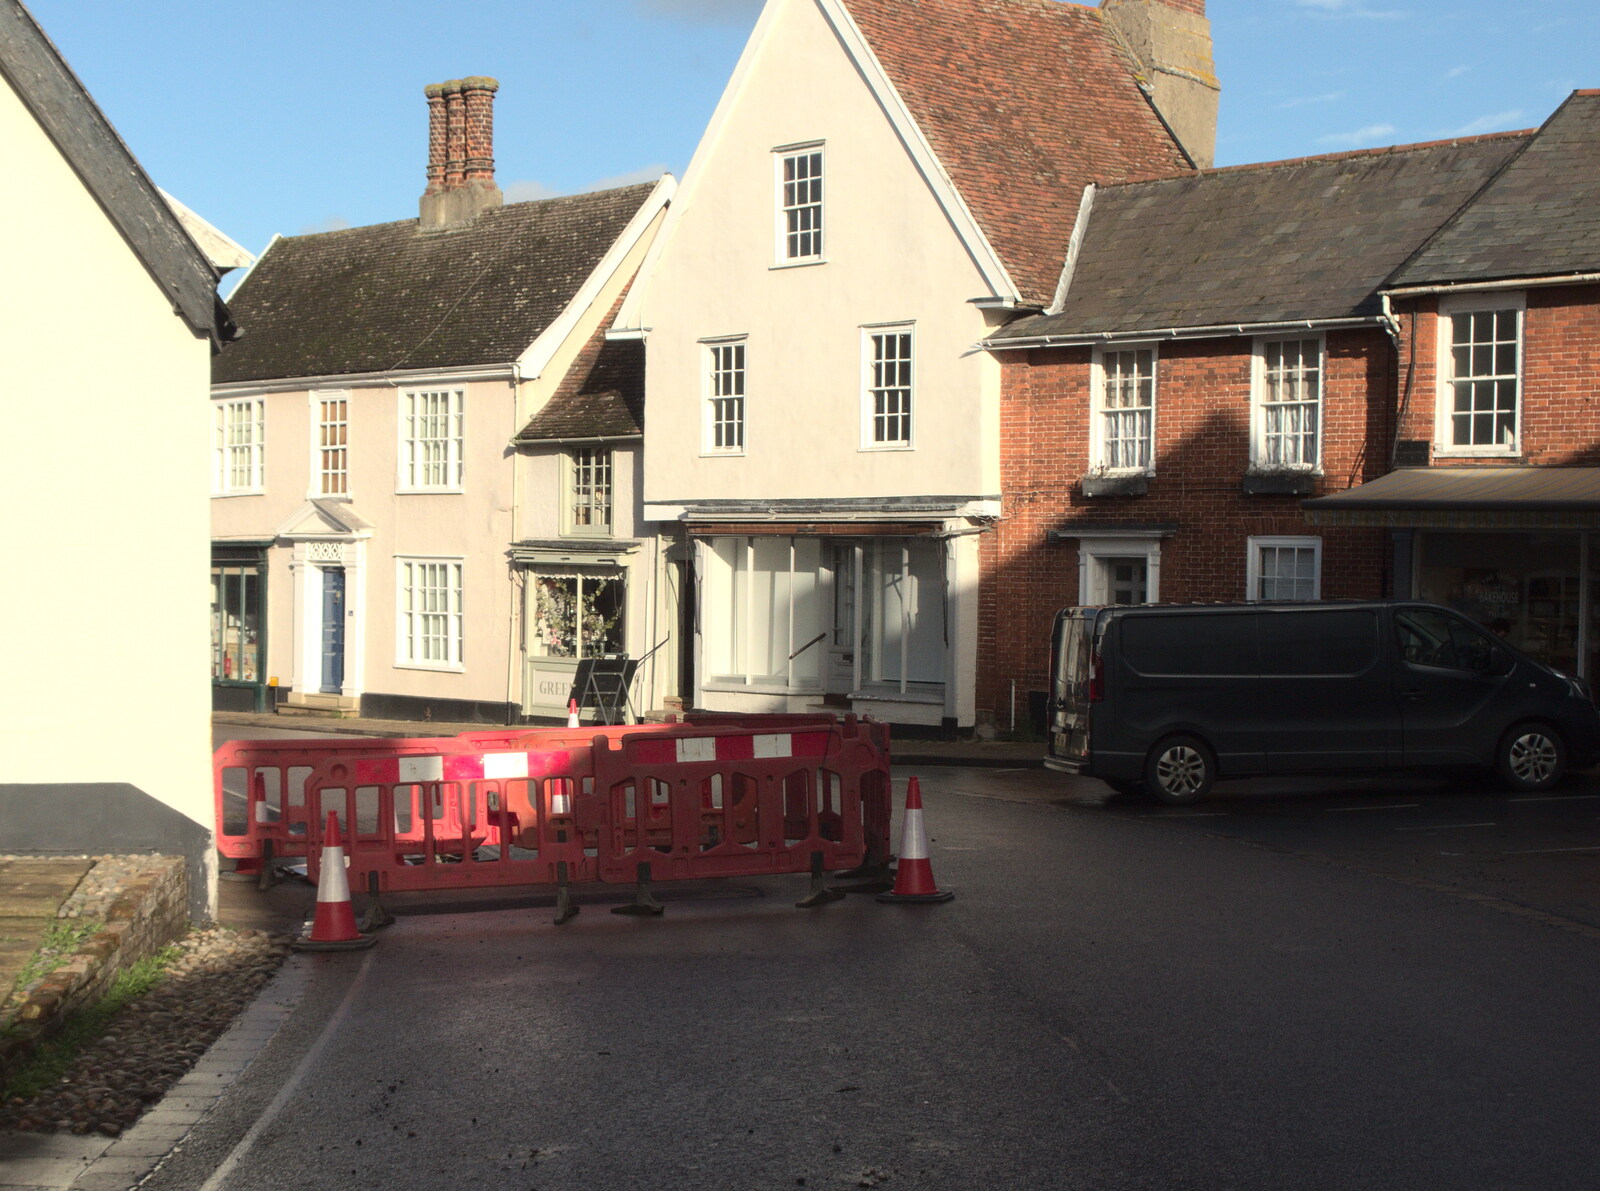 Broad Street in Eye is closed from The GSB at Wickham Skeith, Suffolk - 19th November 2022